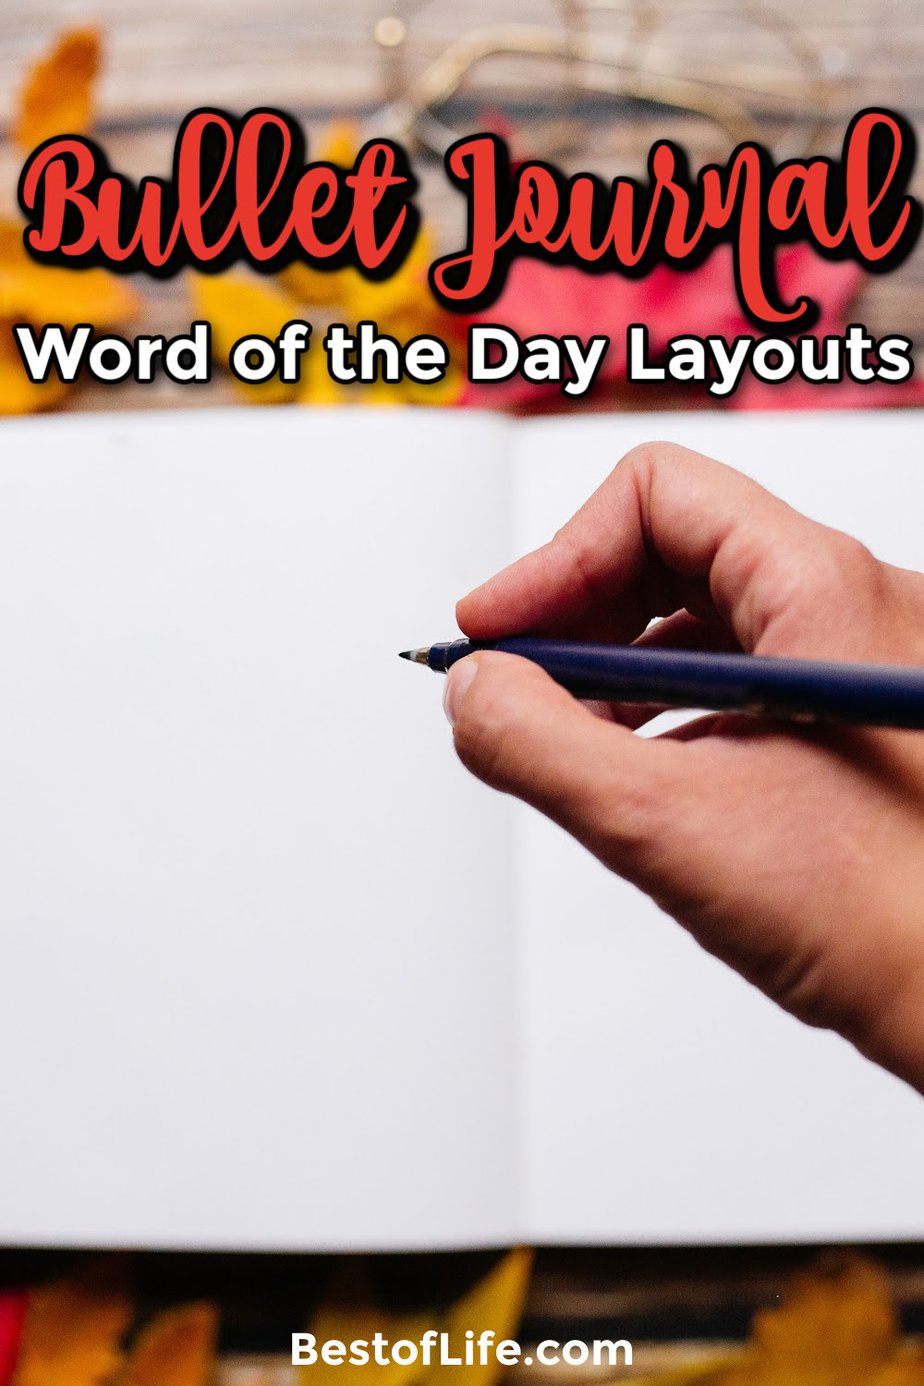 Bullet journal word of the day layouts allows you to motivate yourself every day when you open your journal for the first time. Bullet Journal Ideas | BuJo Ideas | Bullet Journal Layouts | Bullet Journal Inspirational Layouts | Word of The Day #bulletjournal #layouts